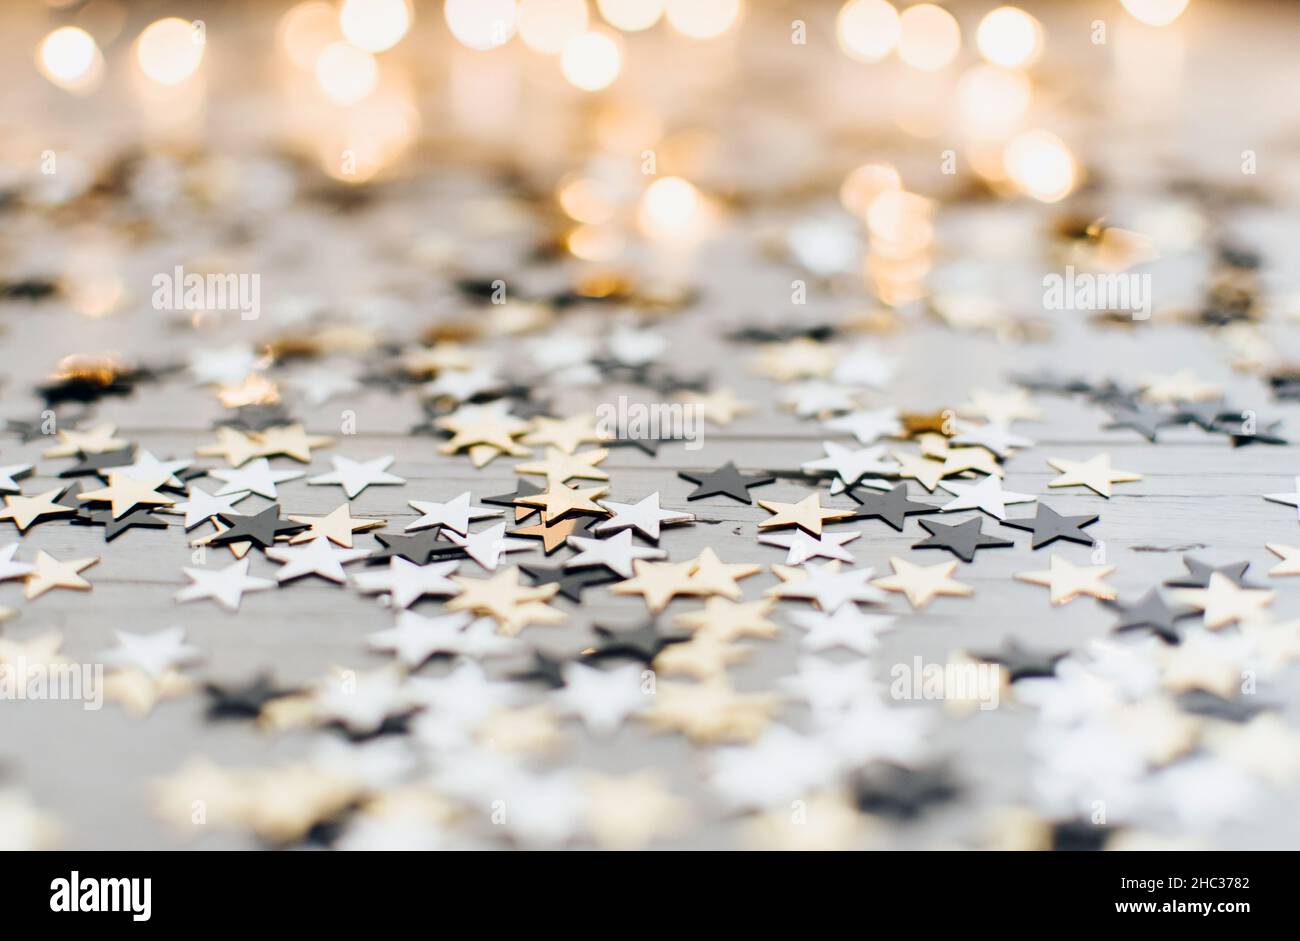 Star shaped new year confetti on white surface in front of bokeh lights Stock Photo